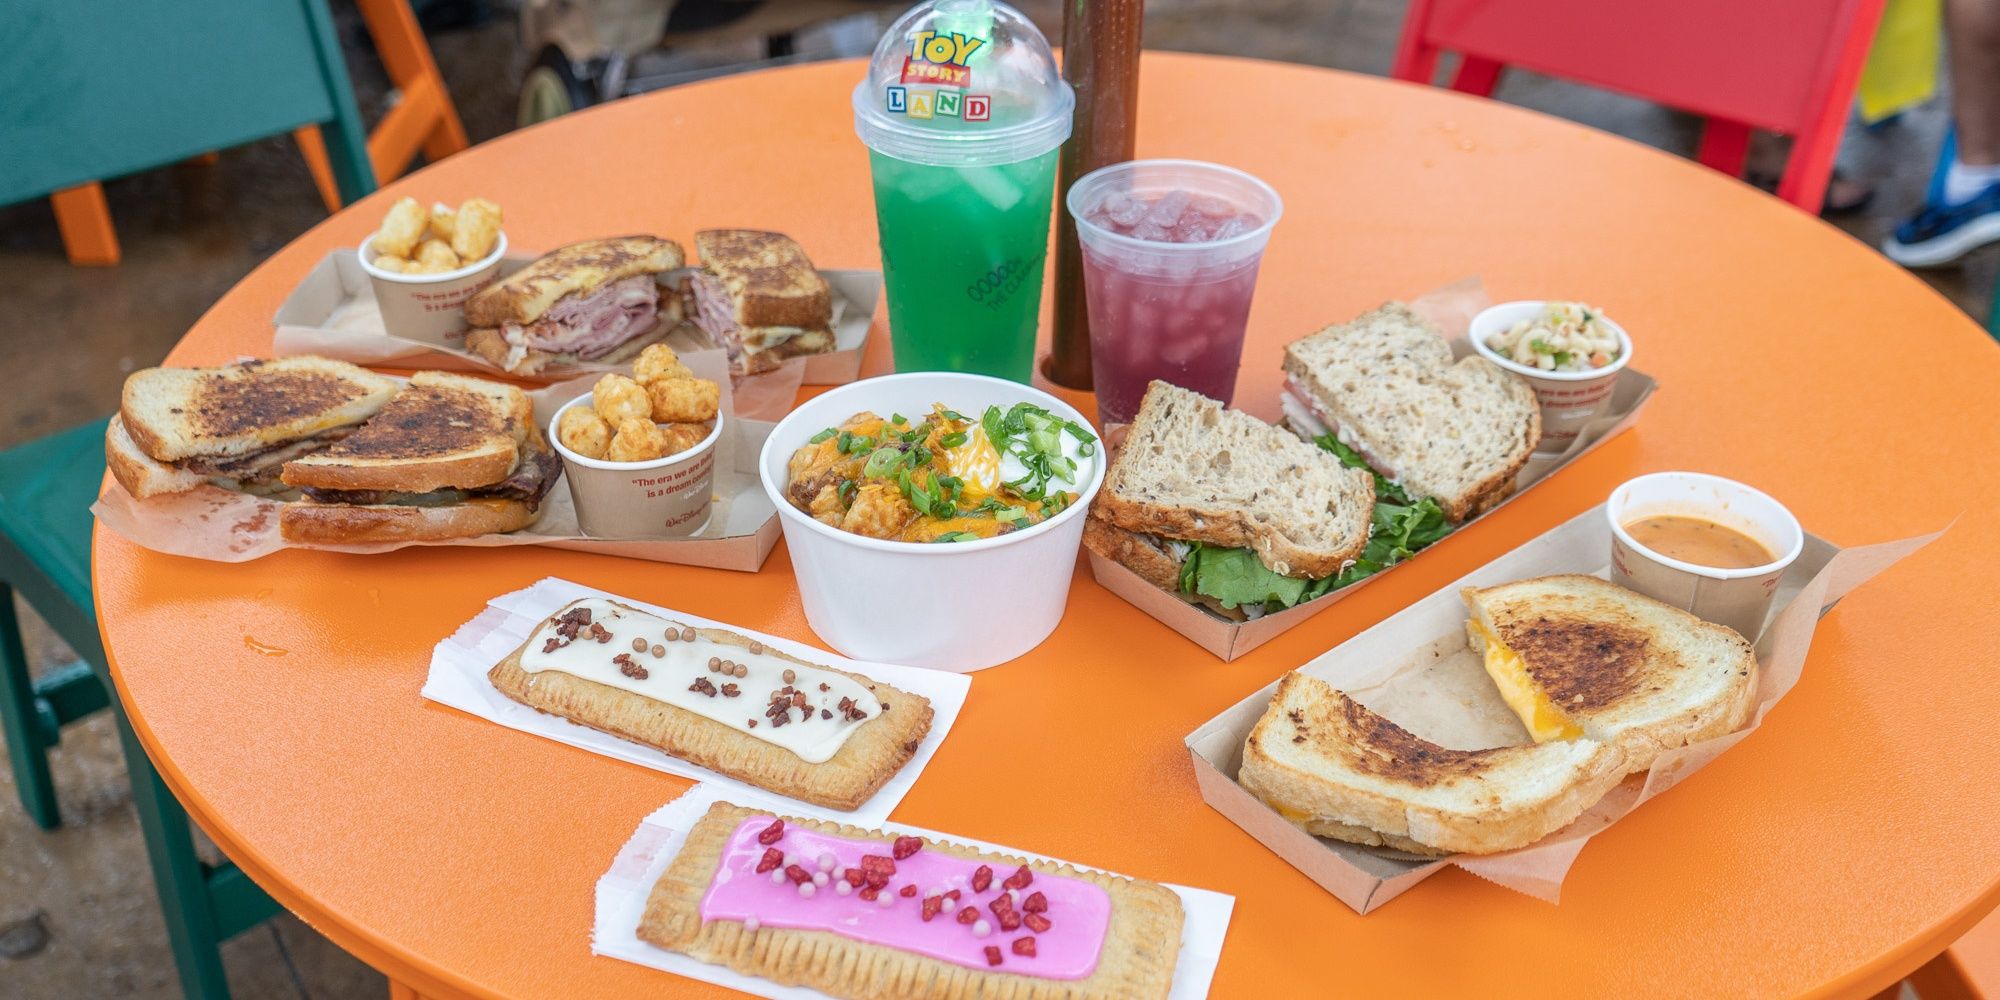 Table full of meals at Hollywood Studios